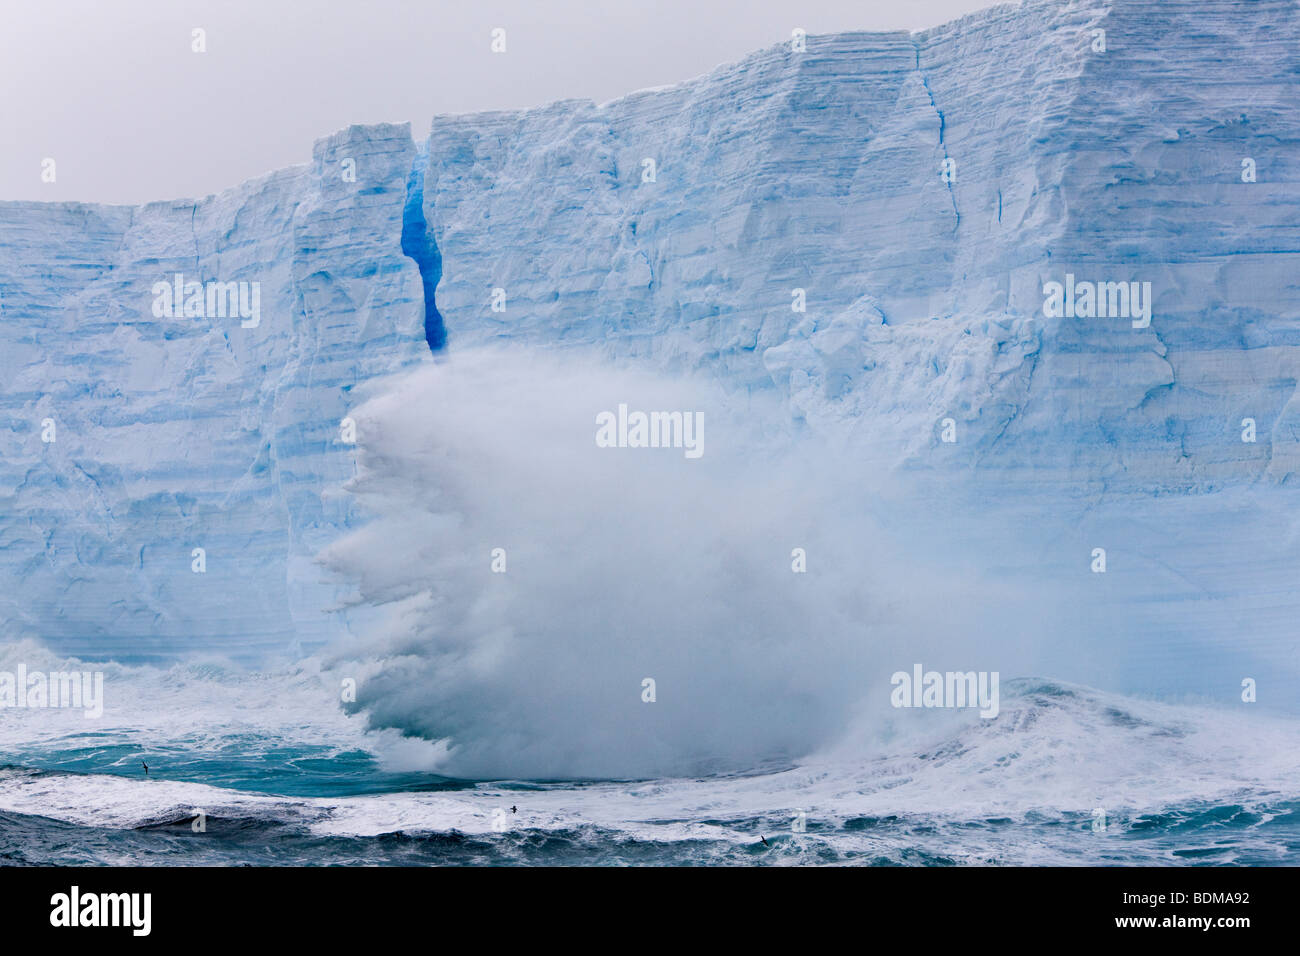 Big blue iceberg floating north in the Southern ocean near South Georgia Islands giant waves crashing against its' tall sides Stock Photo